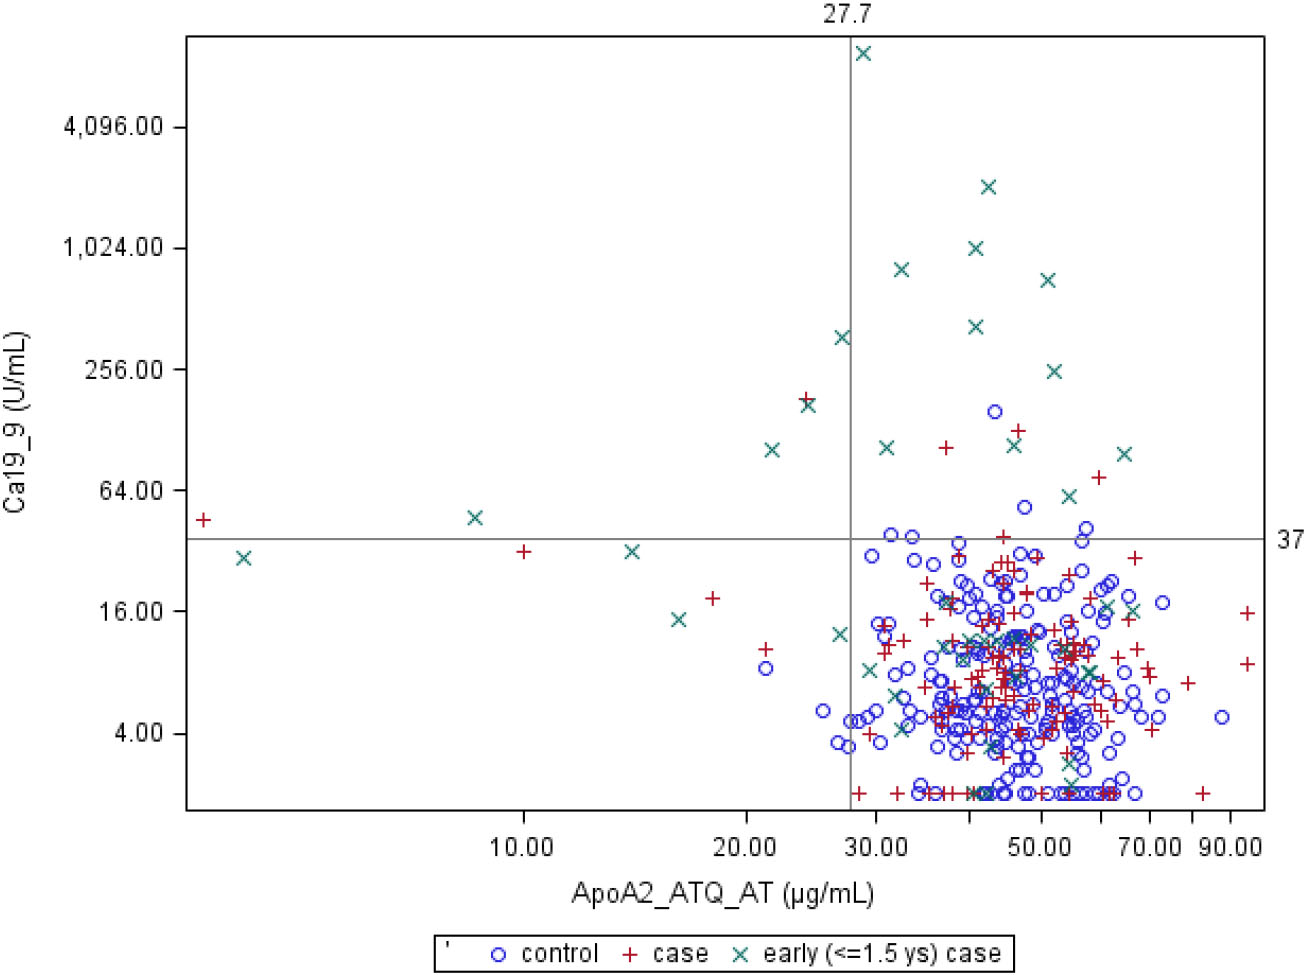 Two-dimensional scatterplots of apoA2-ATQ/AT and CA19-9 in pre-diagnosis serum samples of PDAC that were enrolled by the European Prospective Investigation into Cancer (EPIC) study. Green crosses represent cases diagnosed within ⩽ 18 months after blood was drawn, red crosses represent those diagnosed after longer time intervals (18–60 months). Blue circles represent those never diagnosed with PDAC [21].